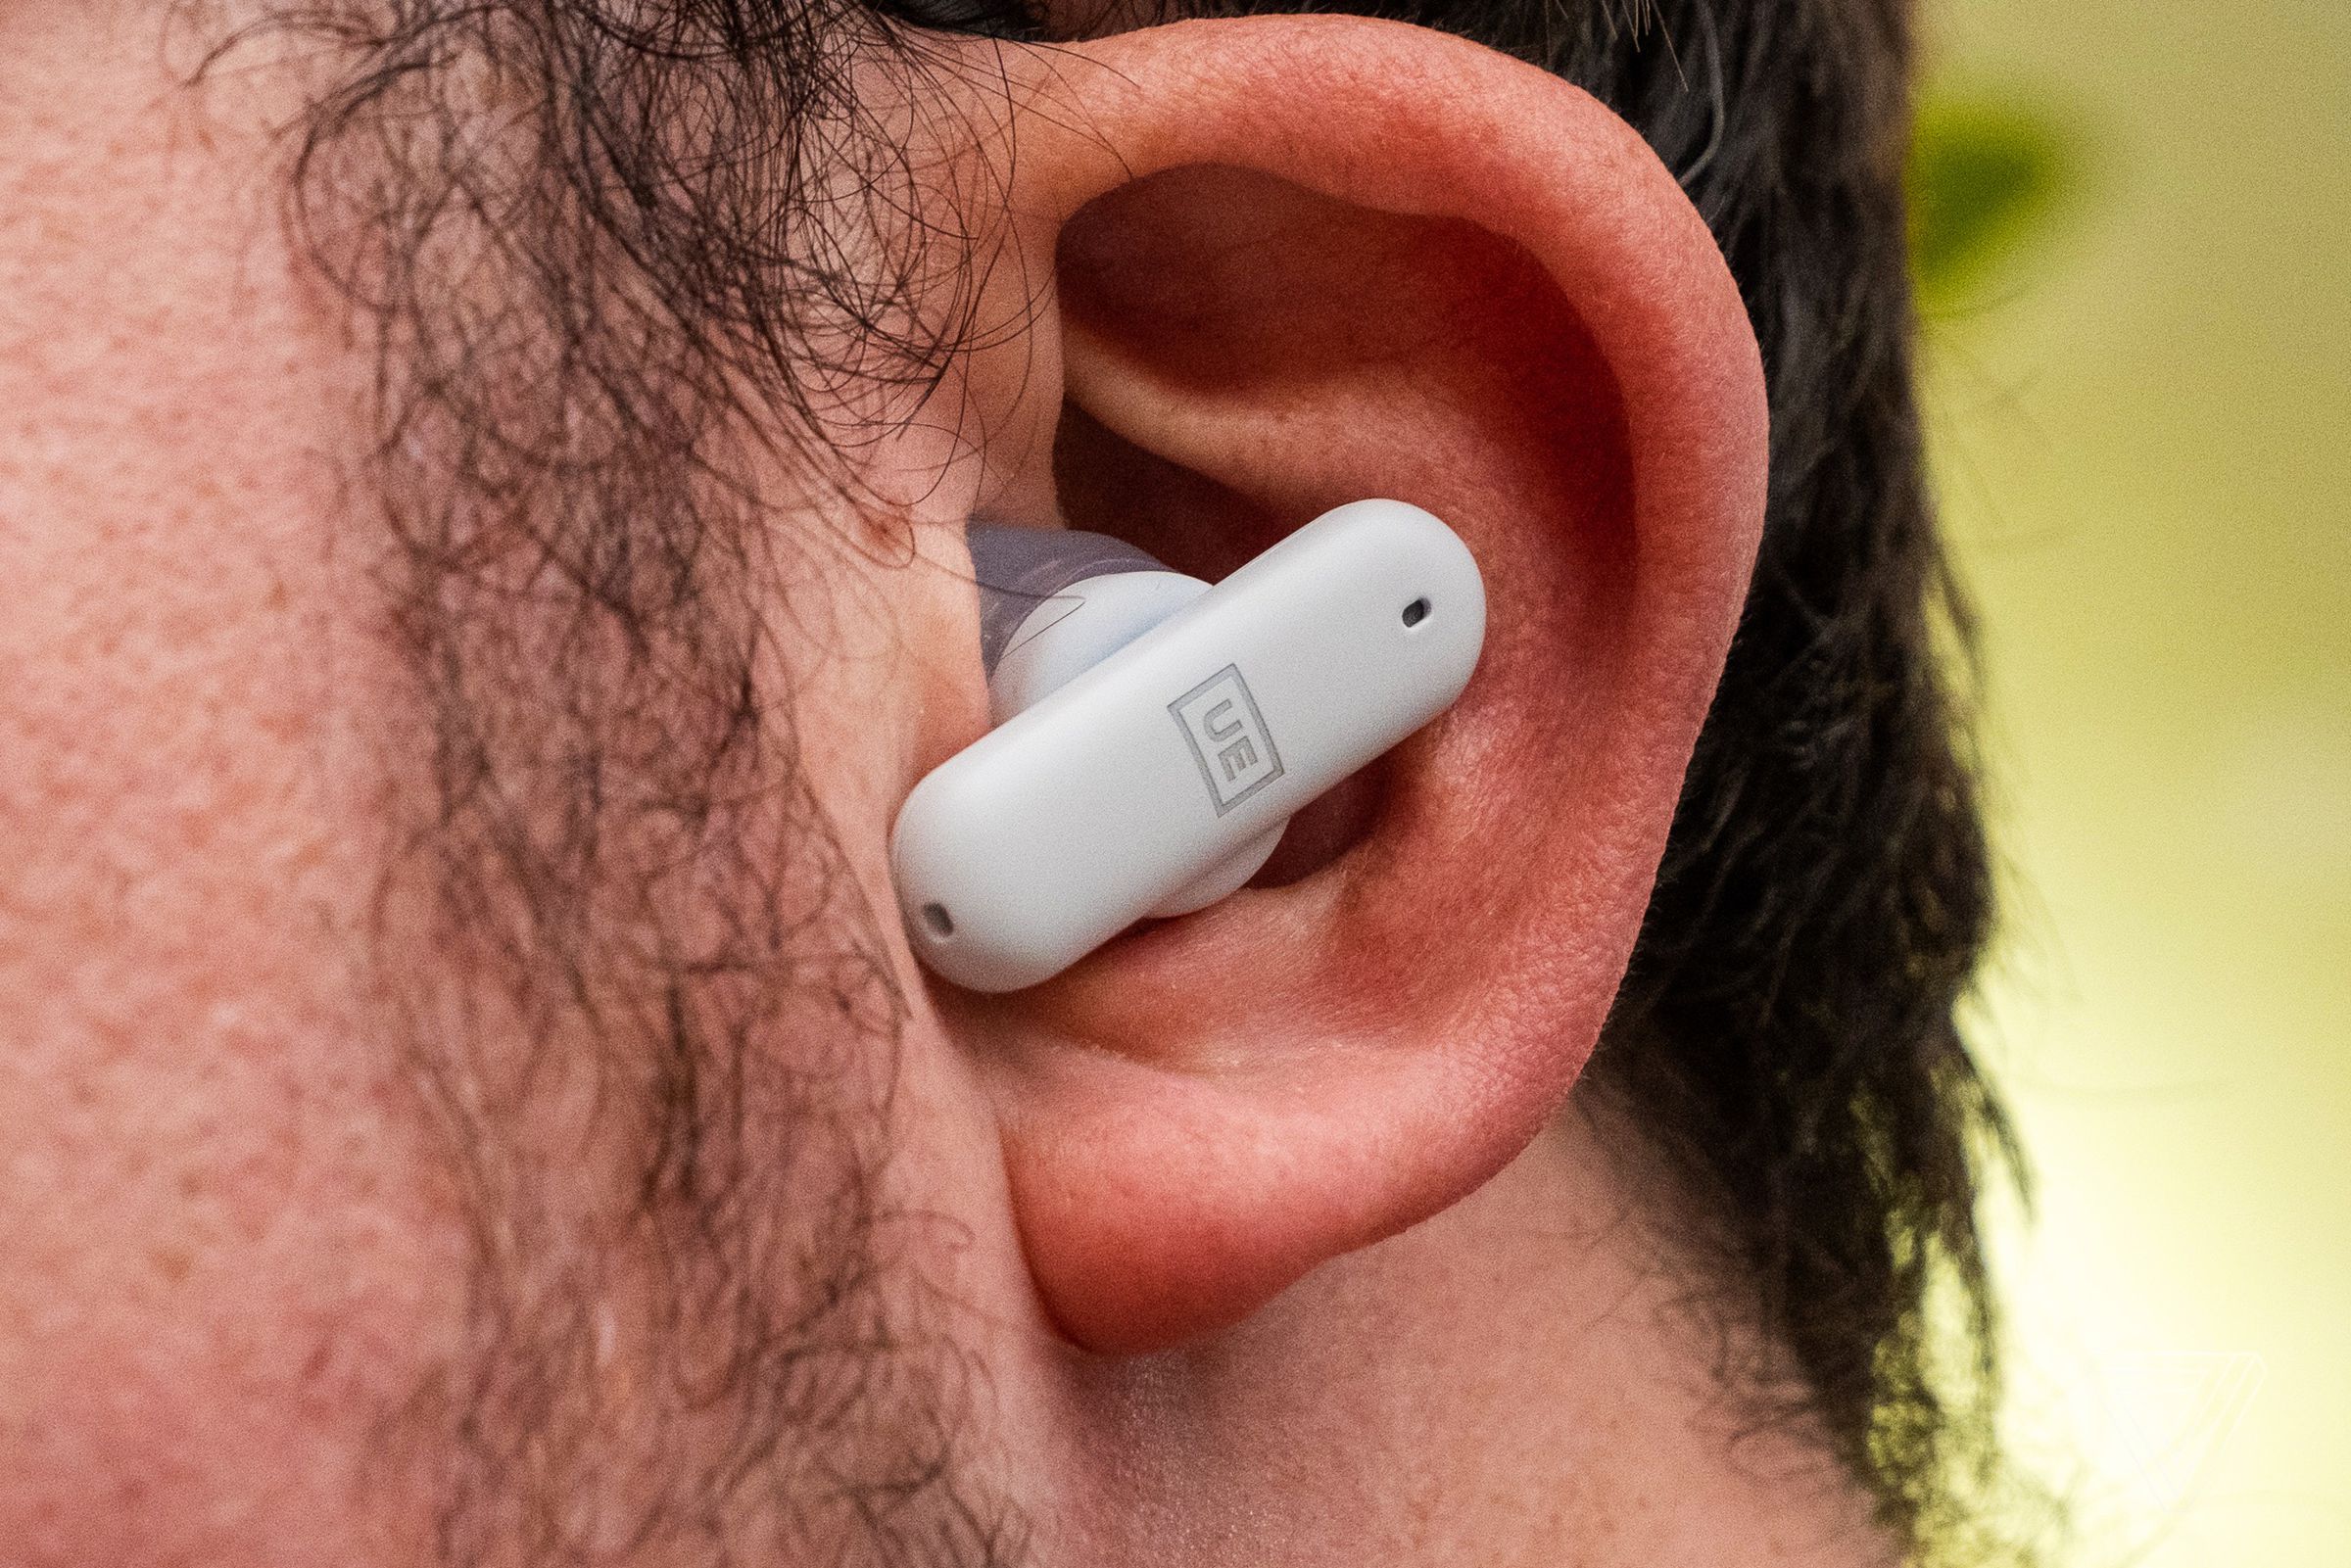 The elongated pill shape makes the Fits easy to handle and put in your ears.